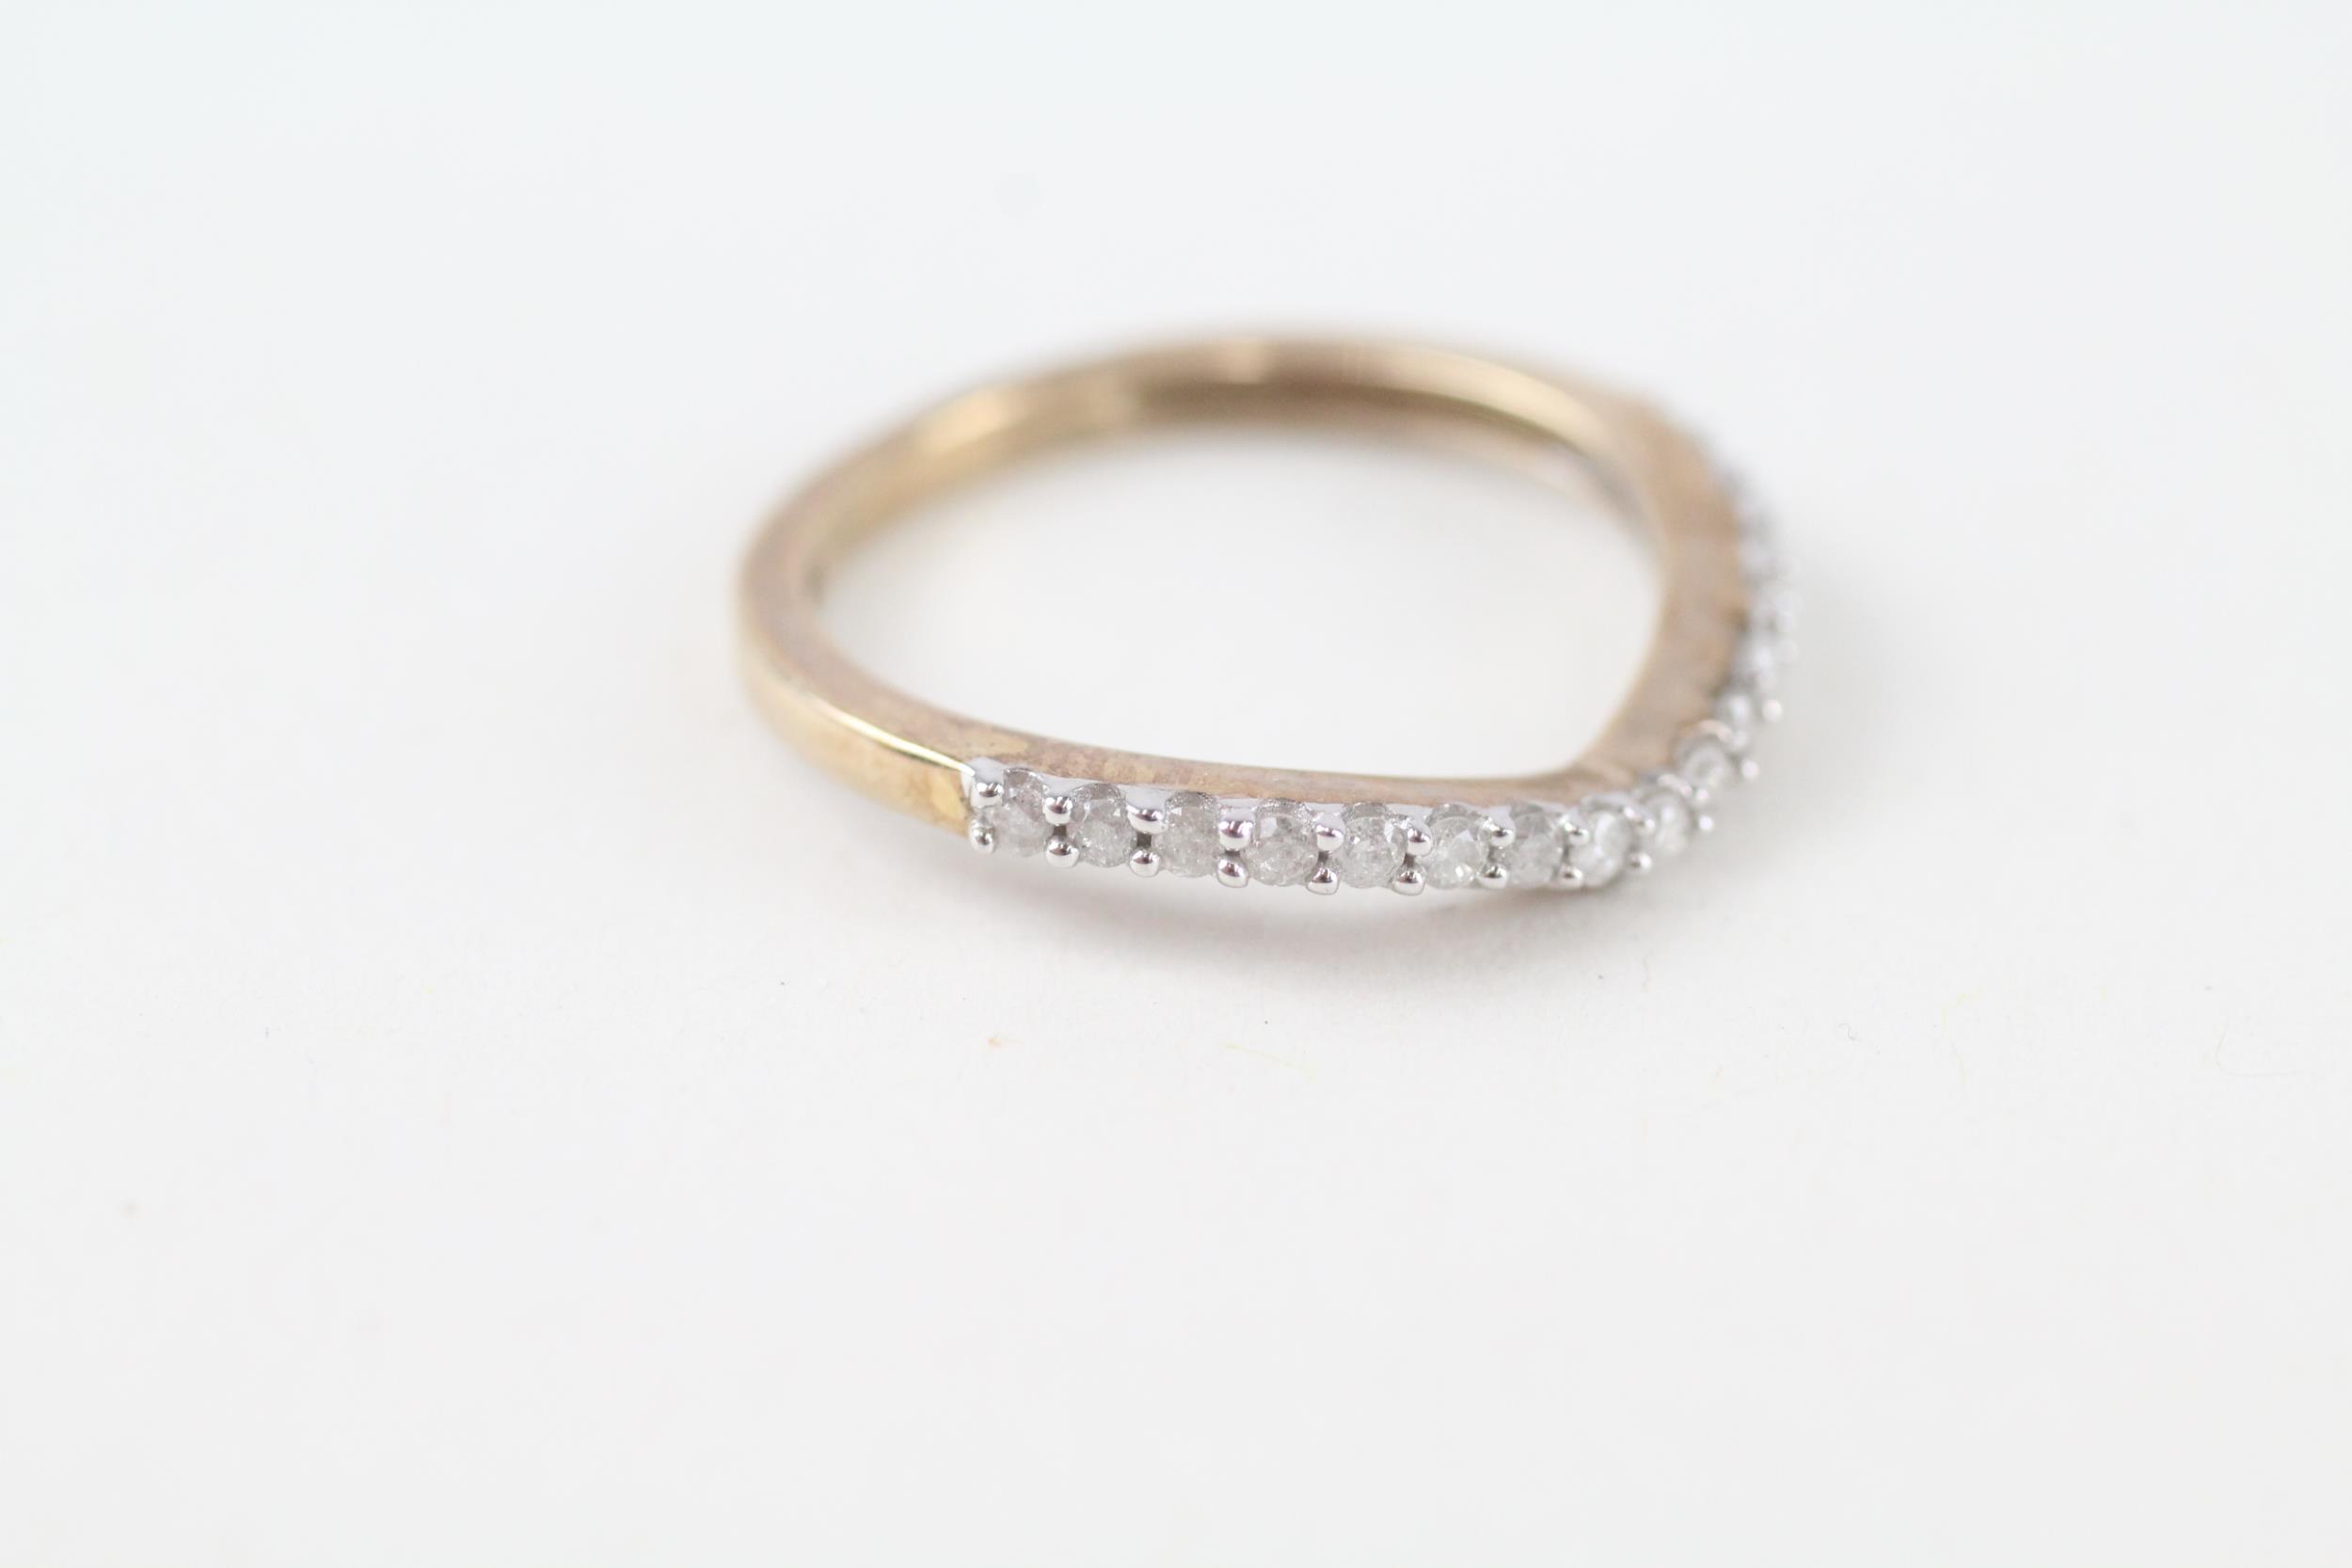 9ct gold diamond curved half eternity ring (1.7g) Size M - Image 3 of 5